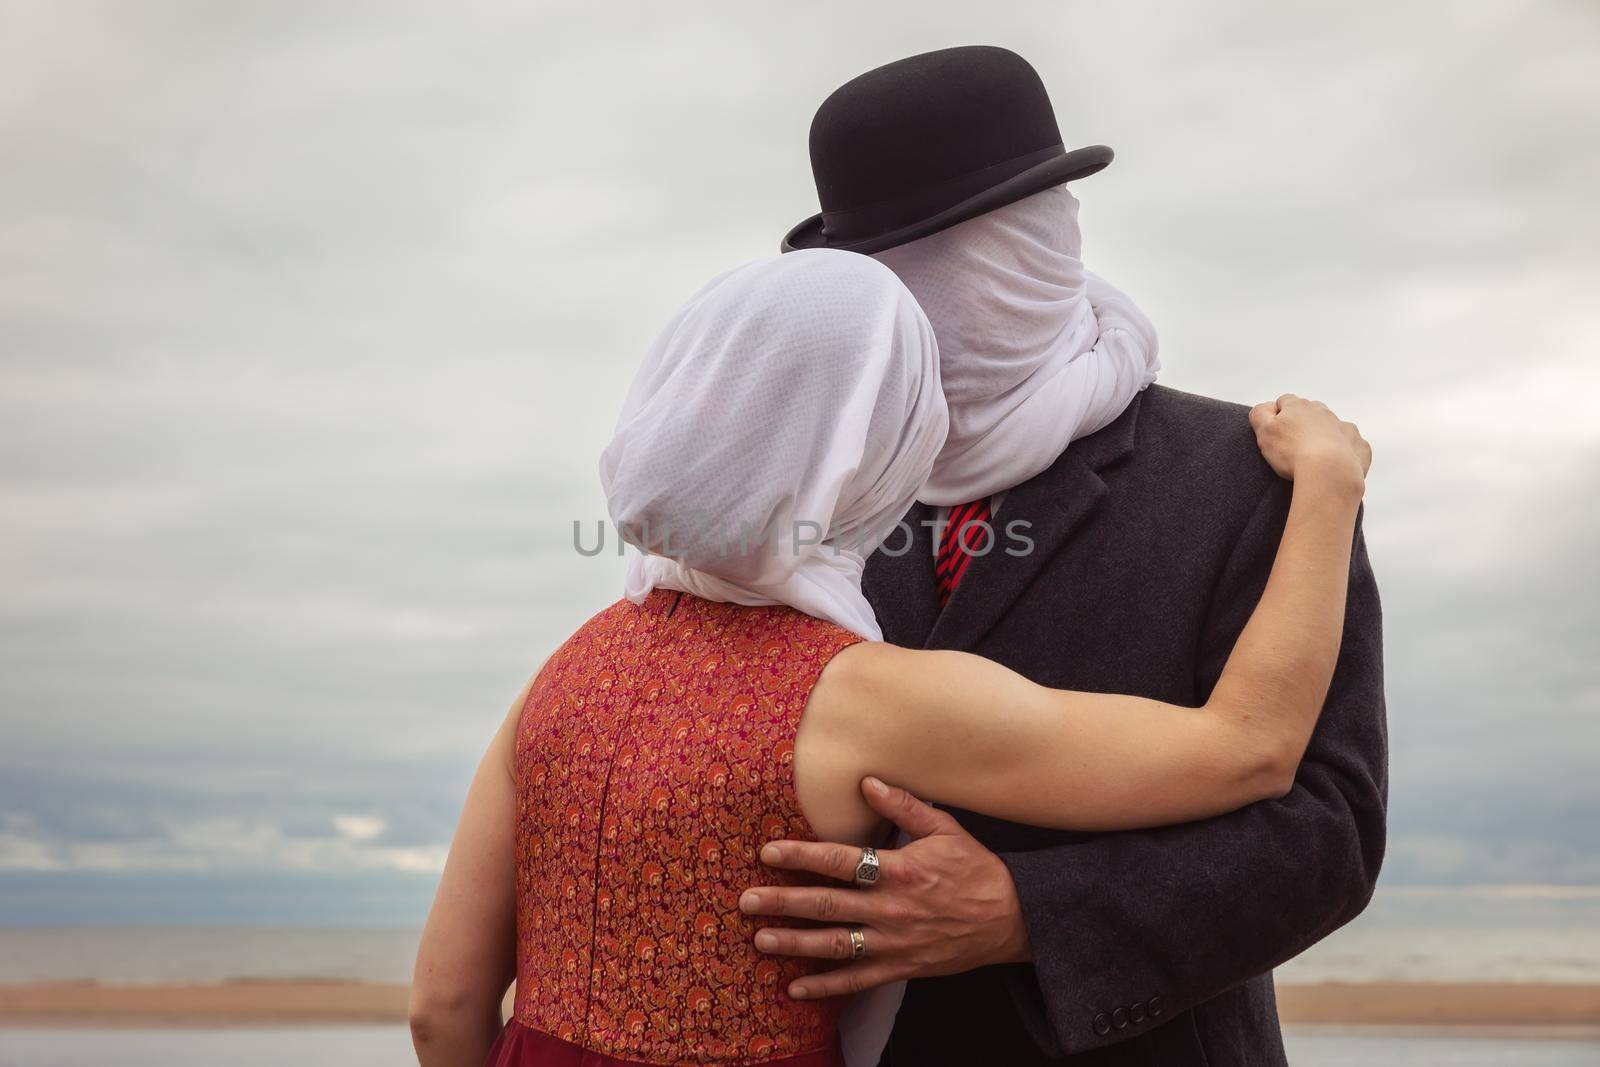 Faceless portrait of man kissing woman with white fabrics on their heads